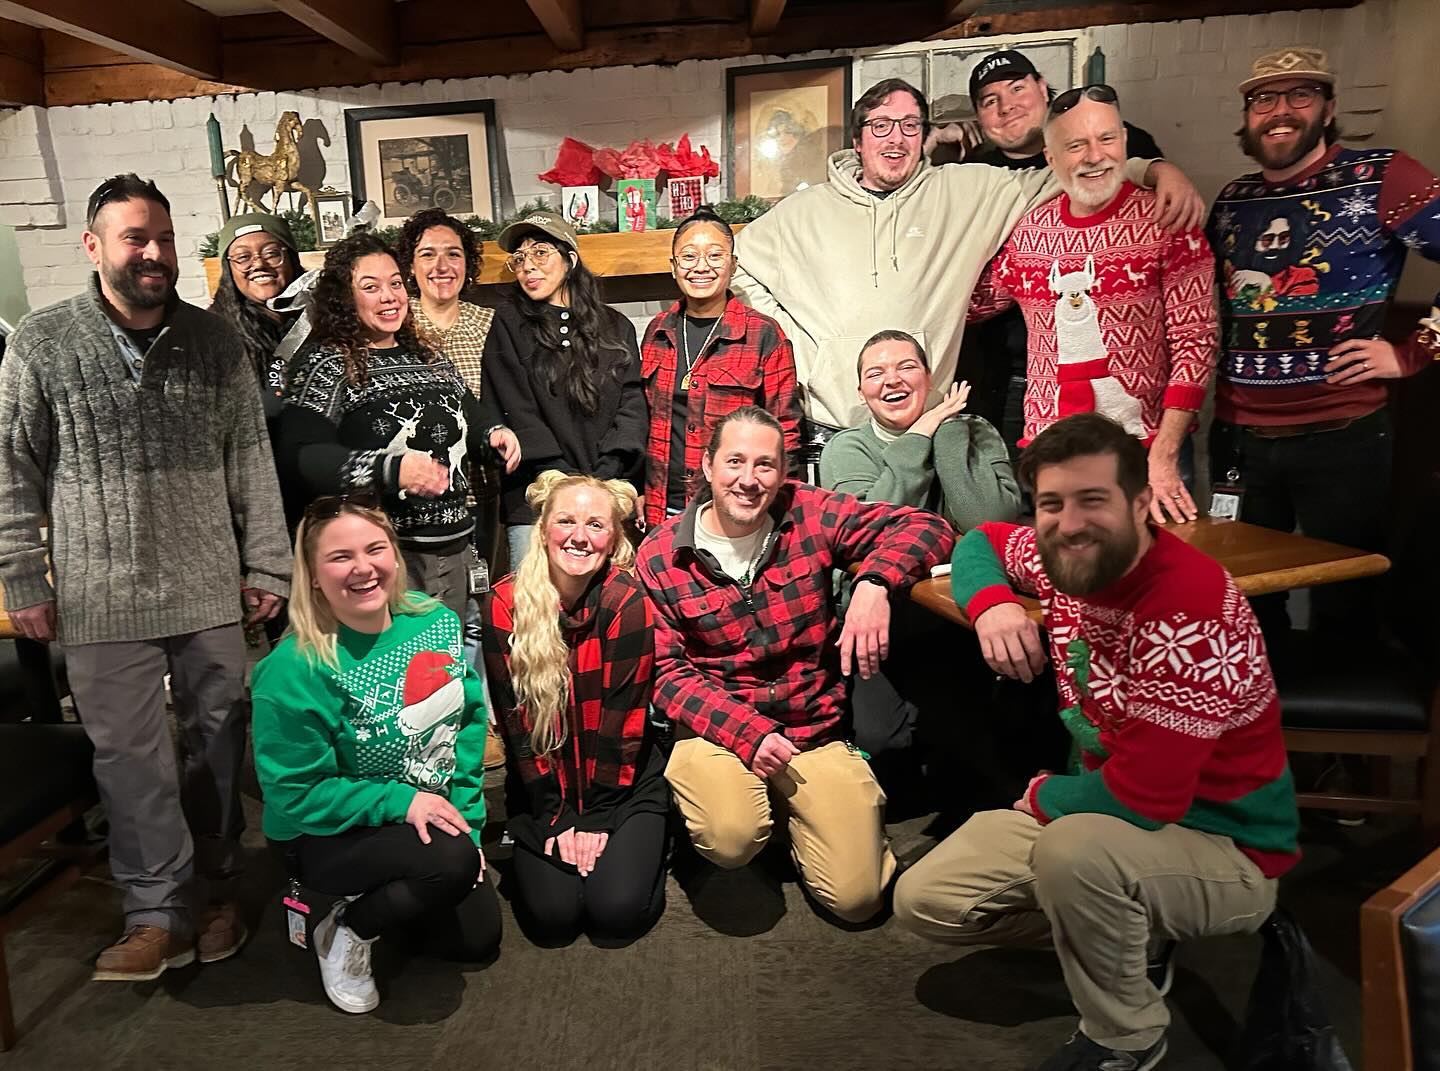 The real holiday miracle is that we were all in one place🤣 Forever grateful to the team that brings the dream to real life every*single*day!
Merry Christmas from our family to yours!️